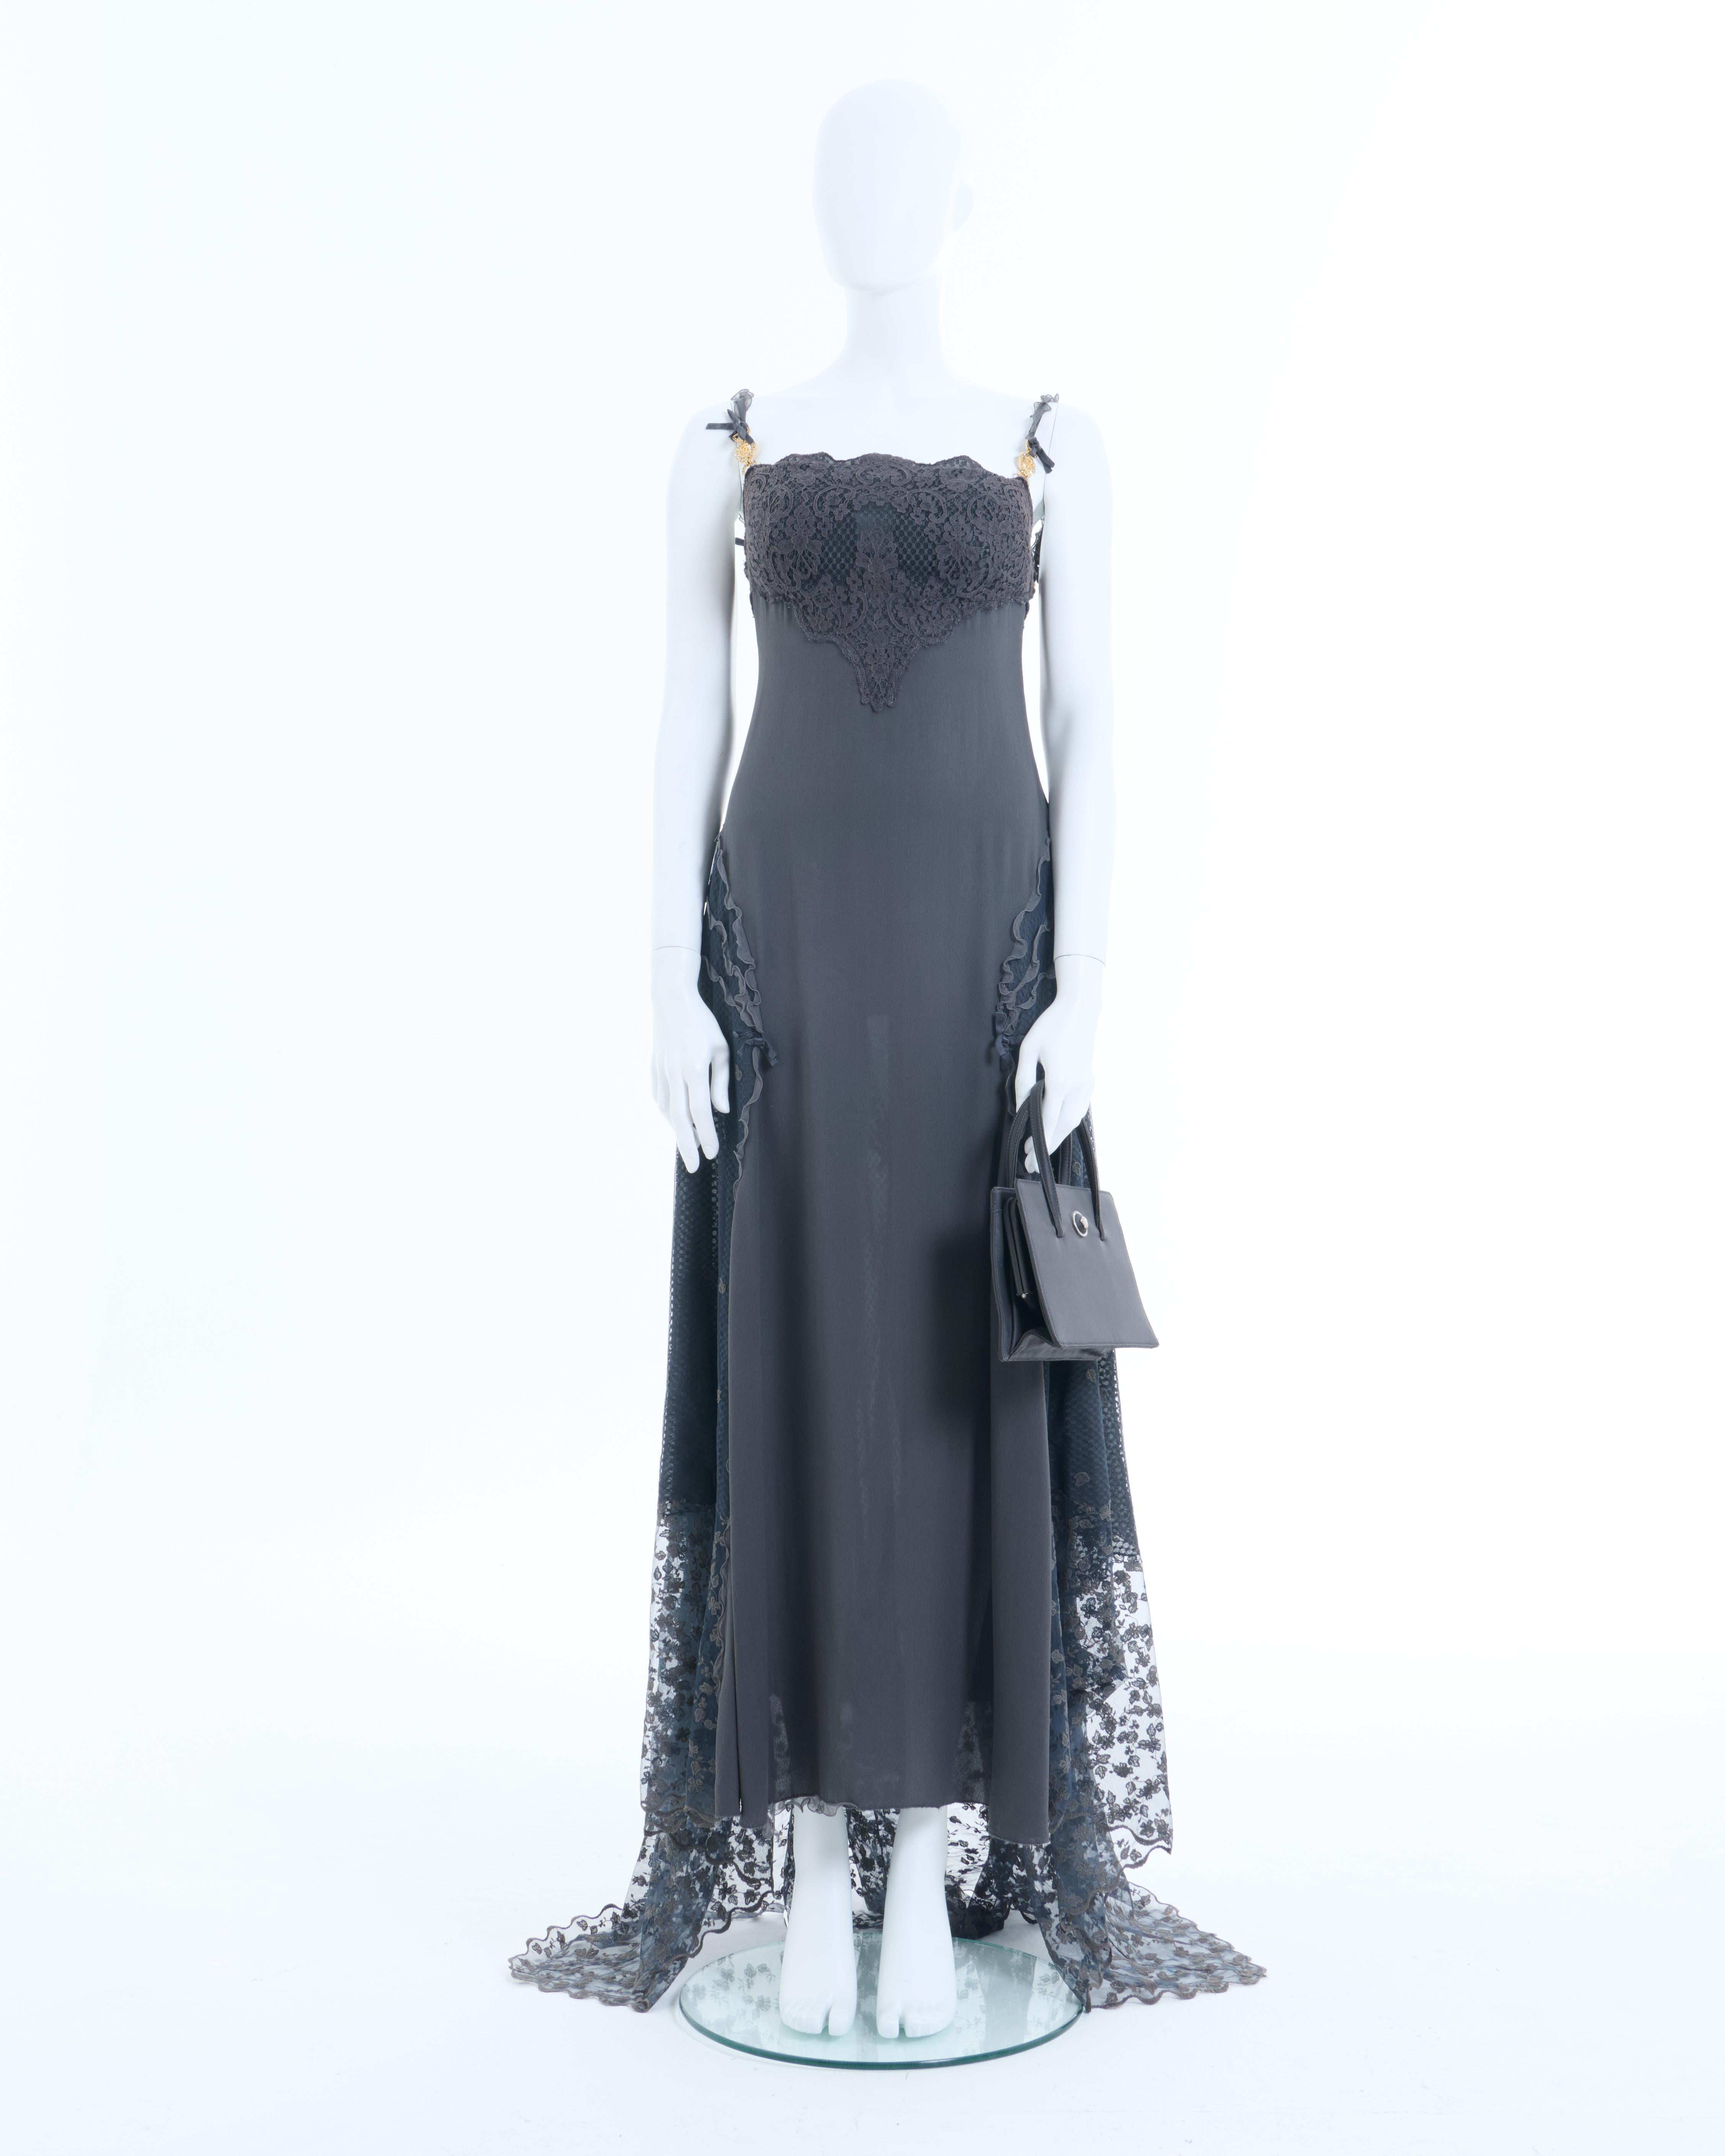 Gianni Versace Couture S/S 1997 Runway Naomi Campbell Sheer Gray Lace Gown In Good Condition For Sale In Milano, IT